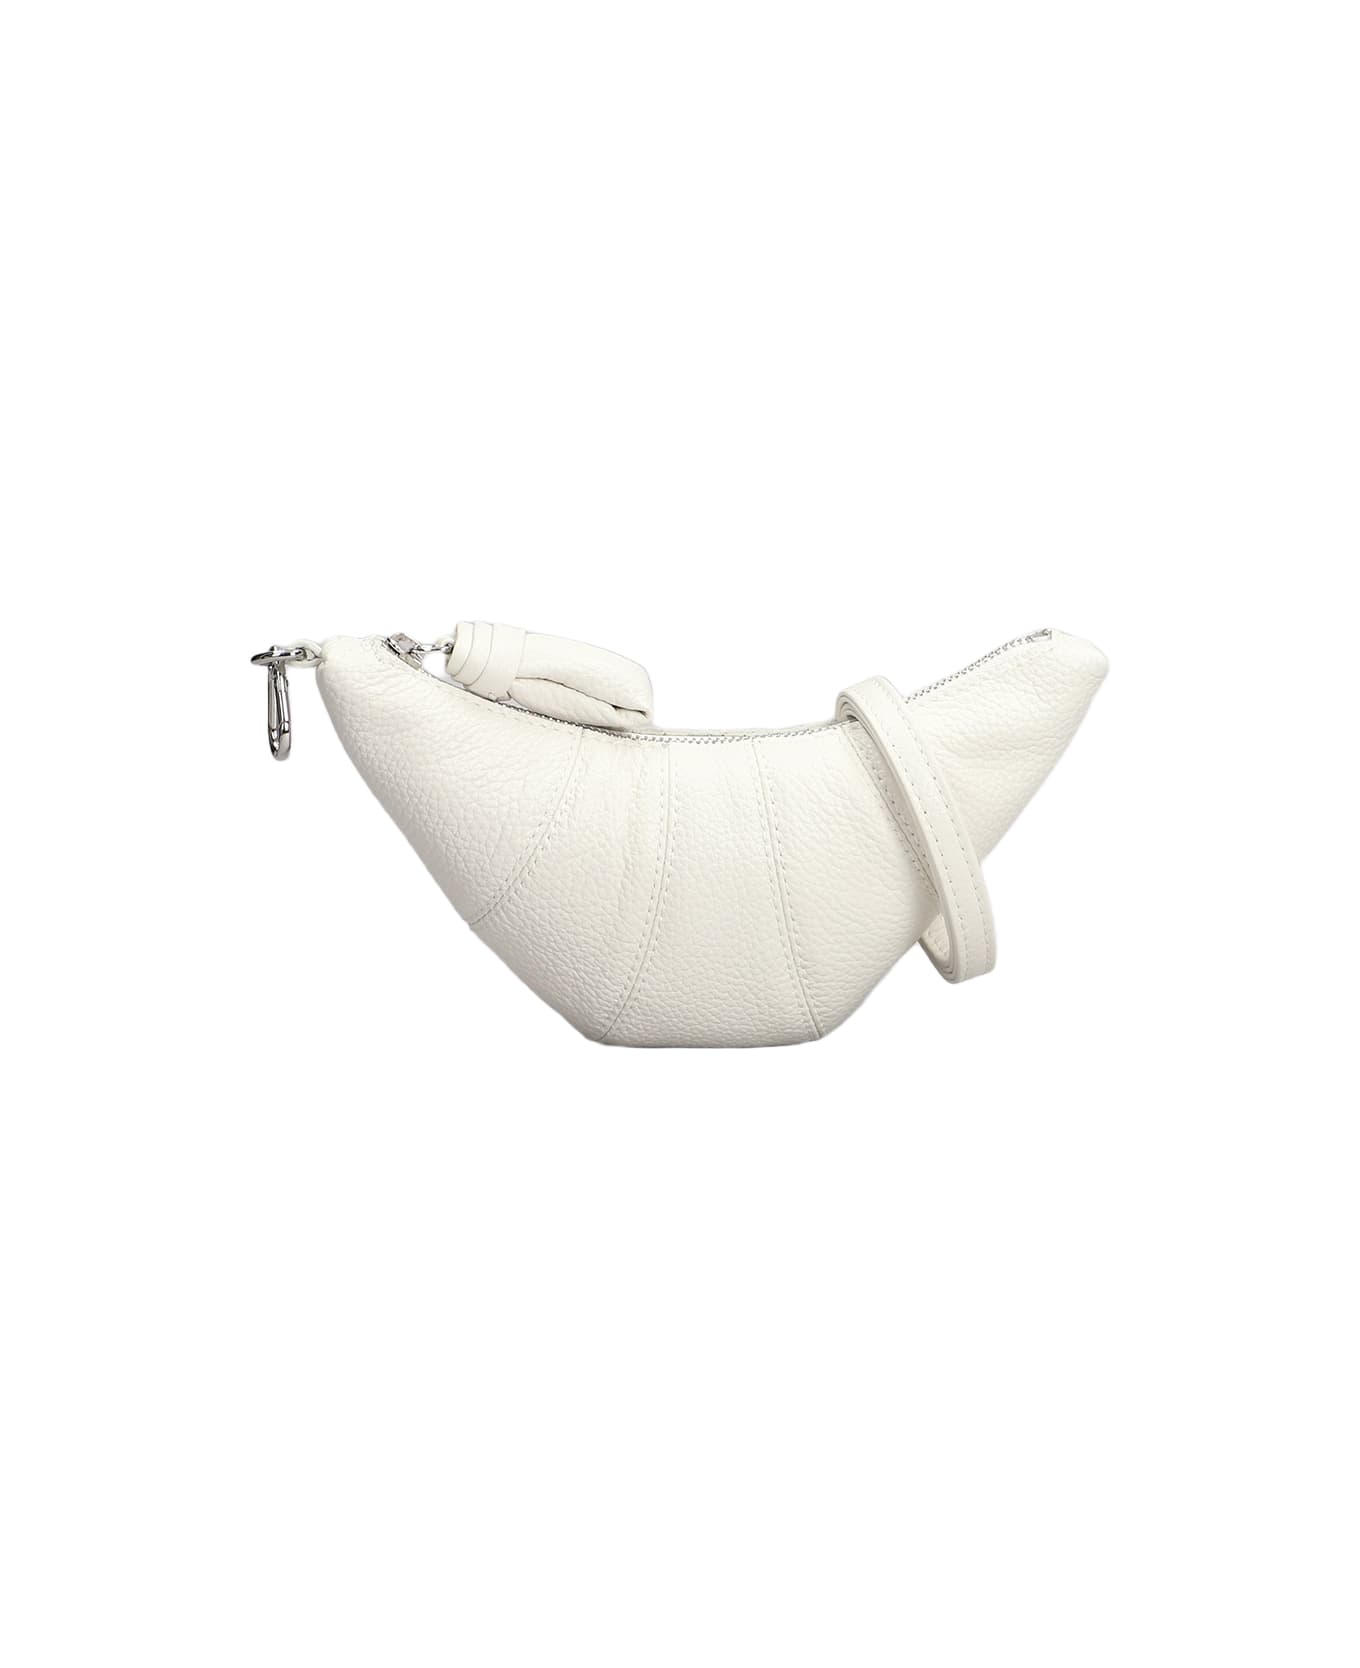 Lemaire Croissant Leather Coin Purse - white